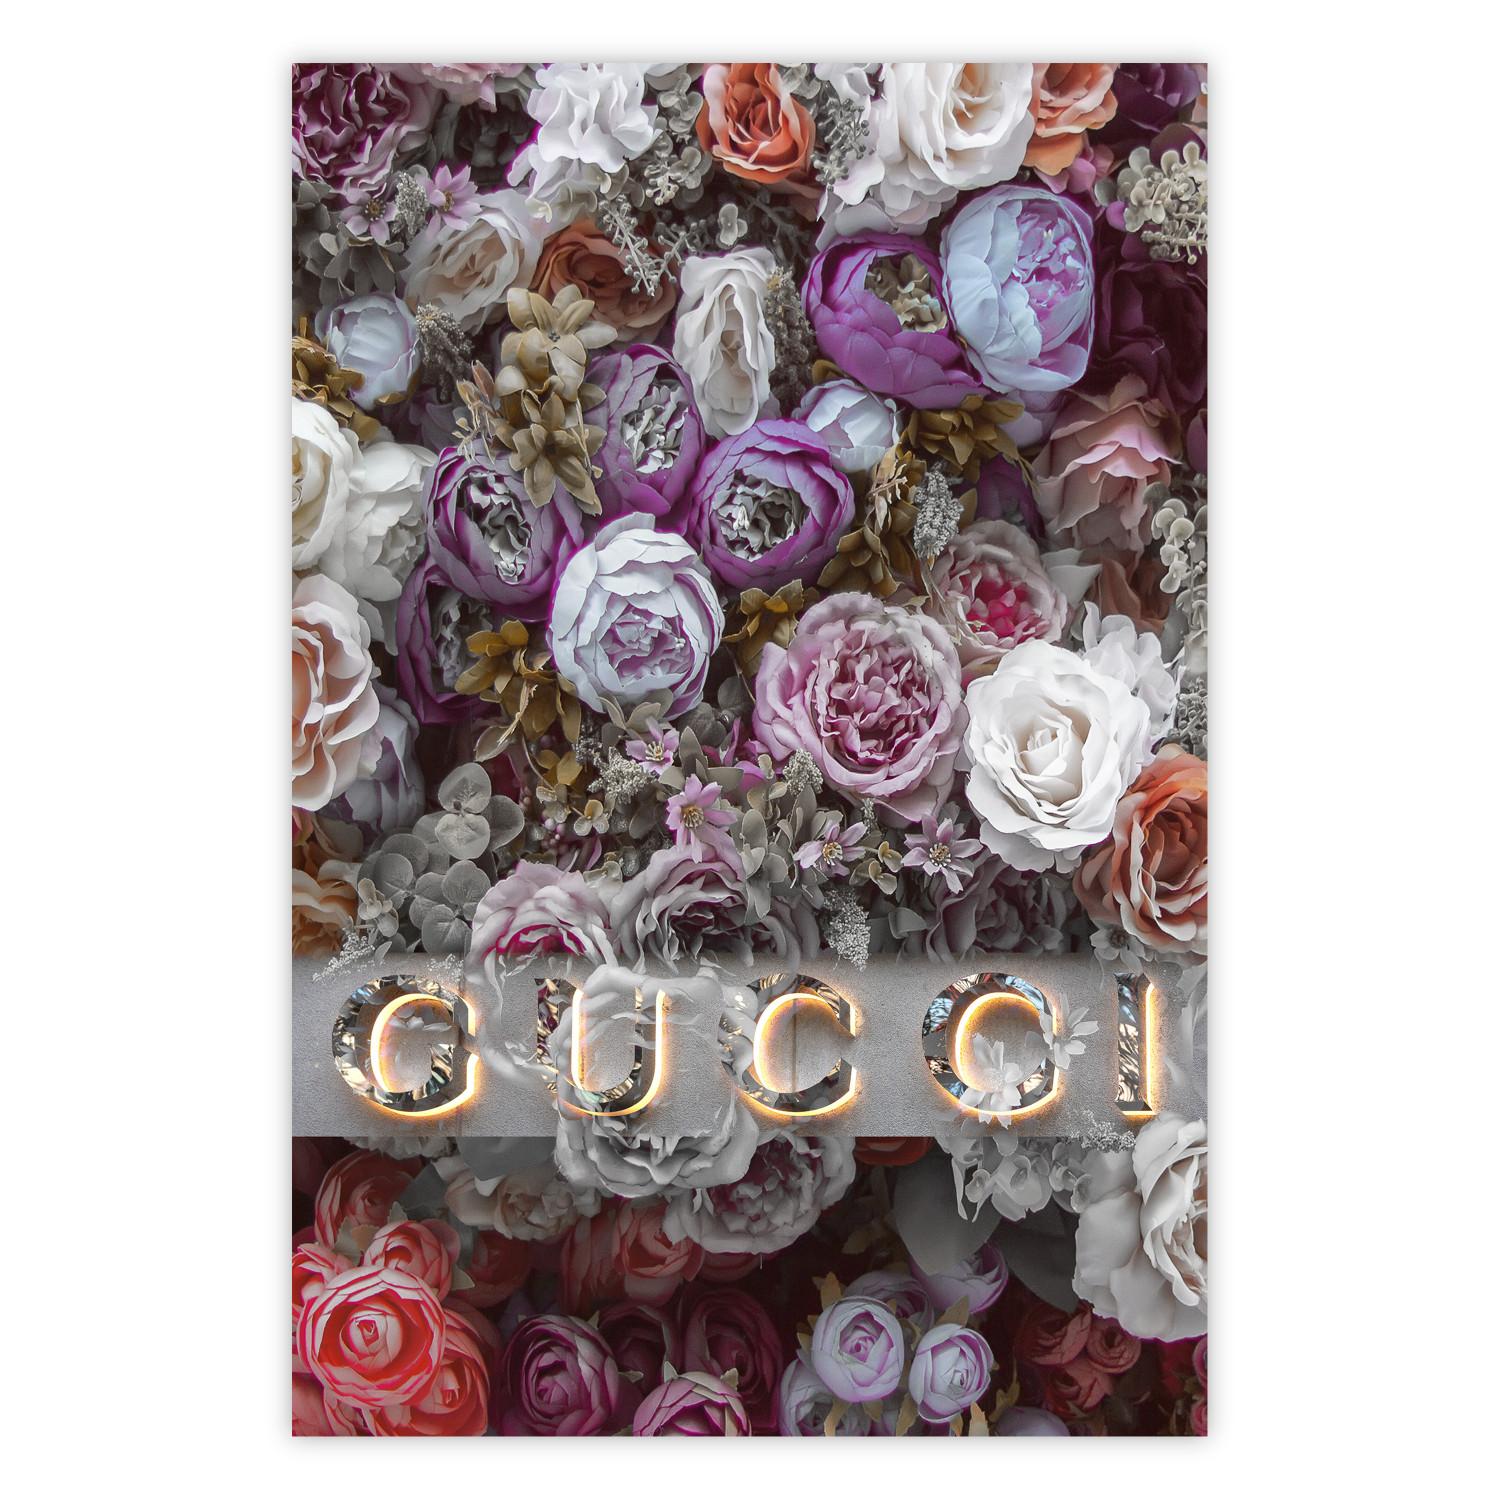 Poster Gucci and Roses - composition of colorful flowers and luxury brand name